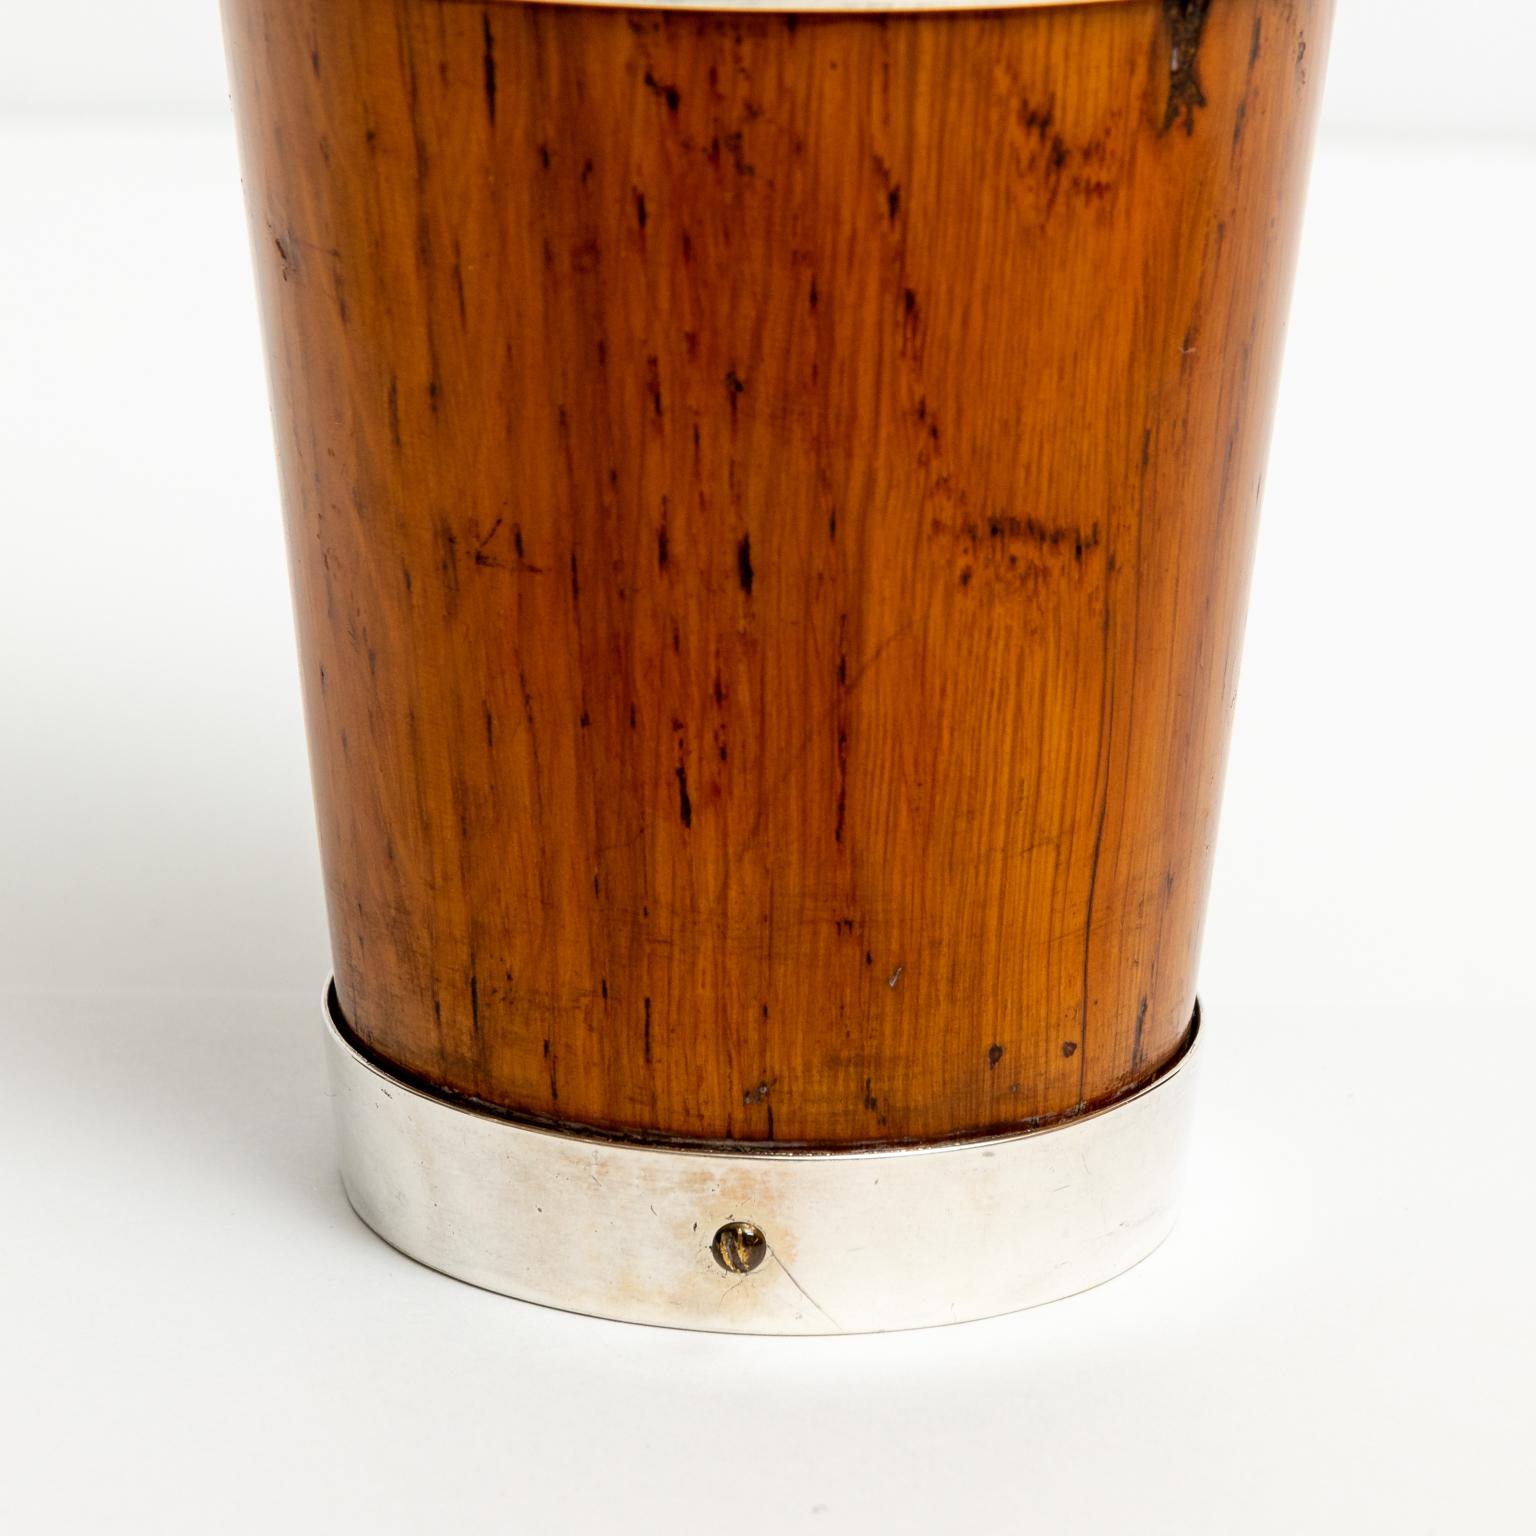 Circa 1930s carved oak and silver plate beaker in the Classic English style. Made in England and stamped with maker's hallmarks on the base. The silver plate accents the oakwood as bands wrapping around the exterior of the beaker and on the top rim.